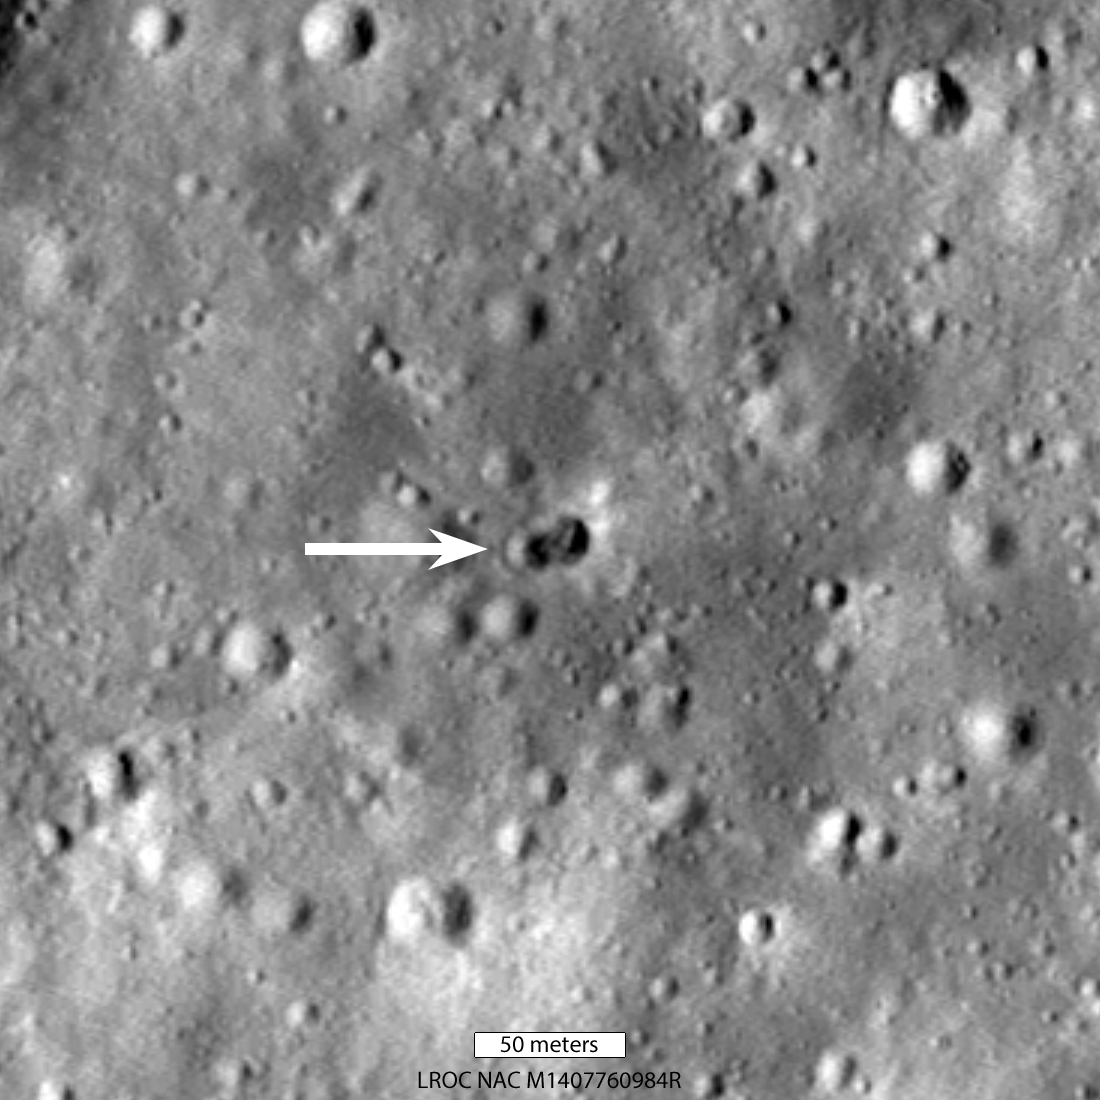 rocky, grayscale lunar landscape, as seen from above by LRO; a white arrow indicates the rocket body impact site